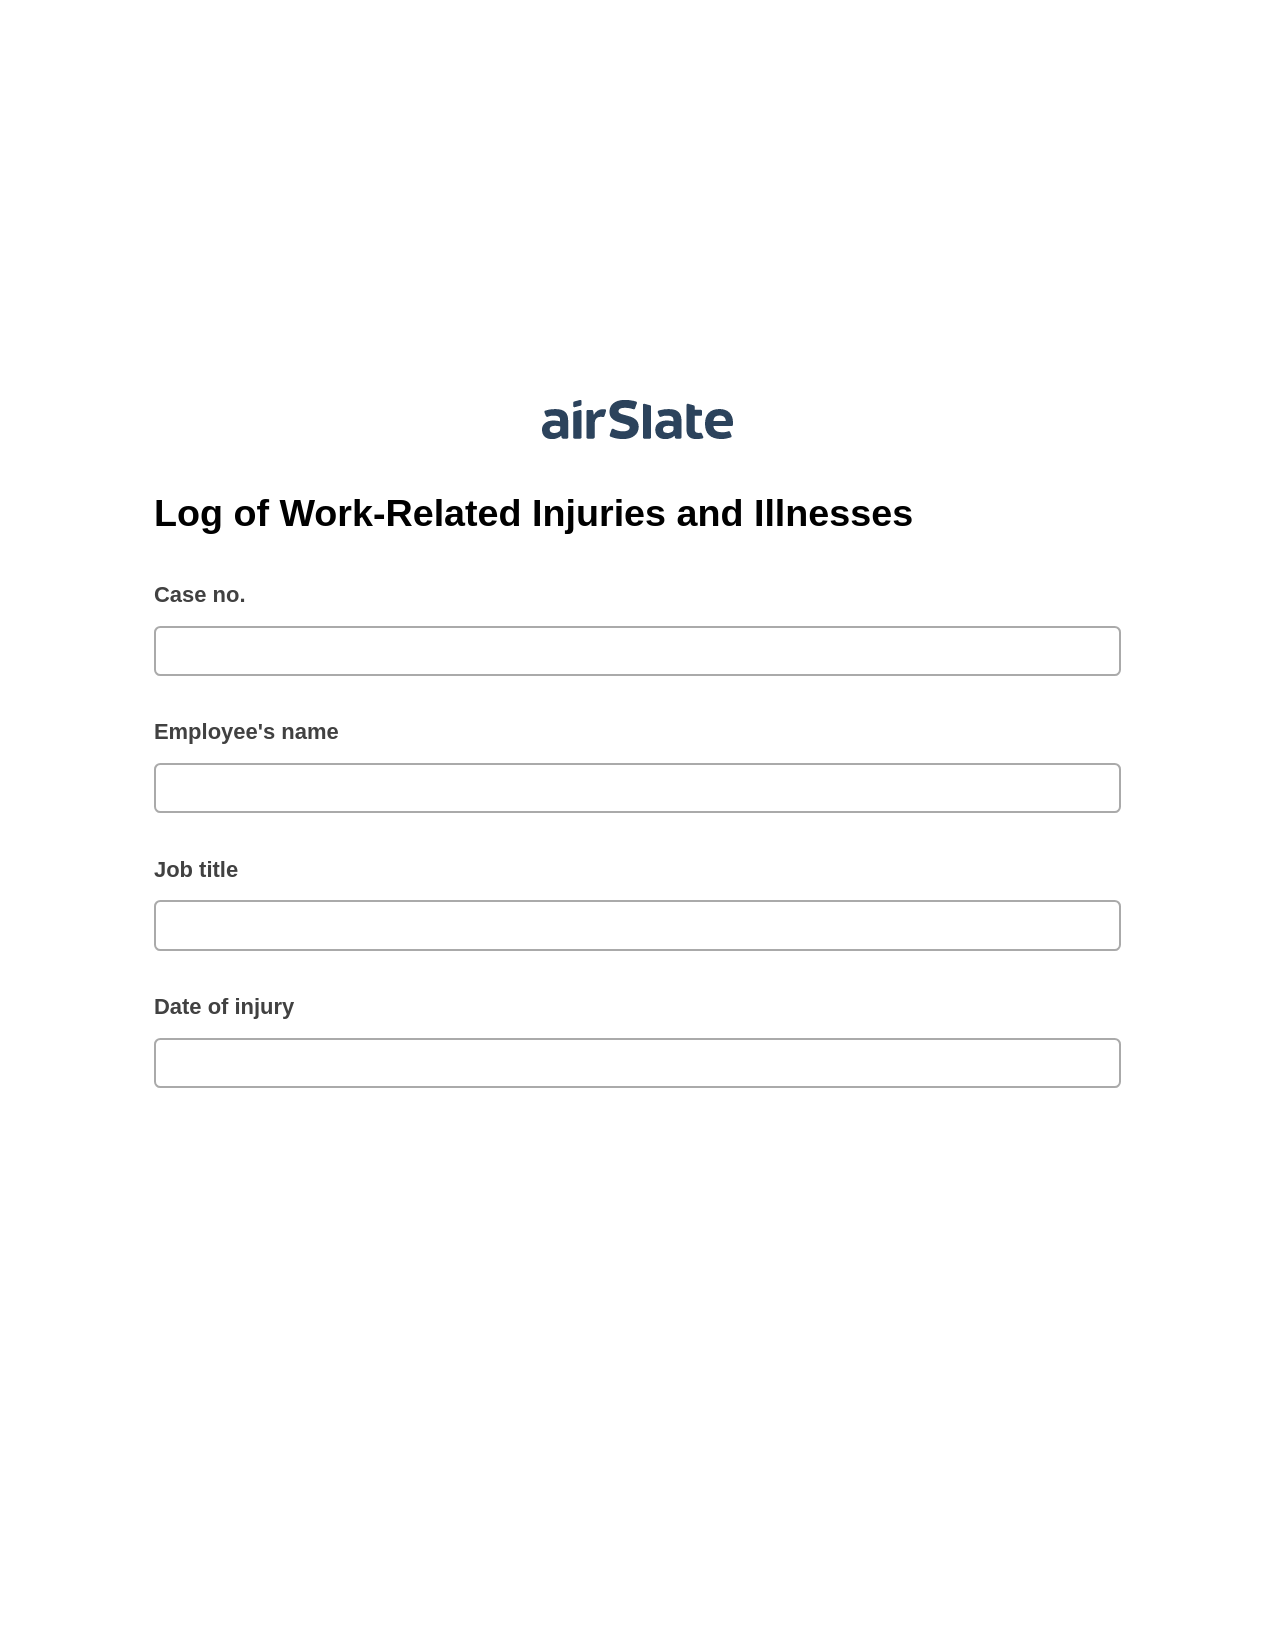 Log of Work-Related Injuries and Illnesses Pre-fill Dropdowns from Office 365 Excel Bot, Unassign Role Bot, Google Drive Bot